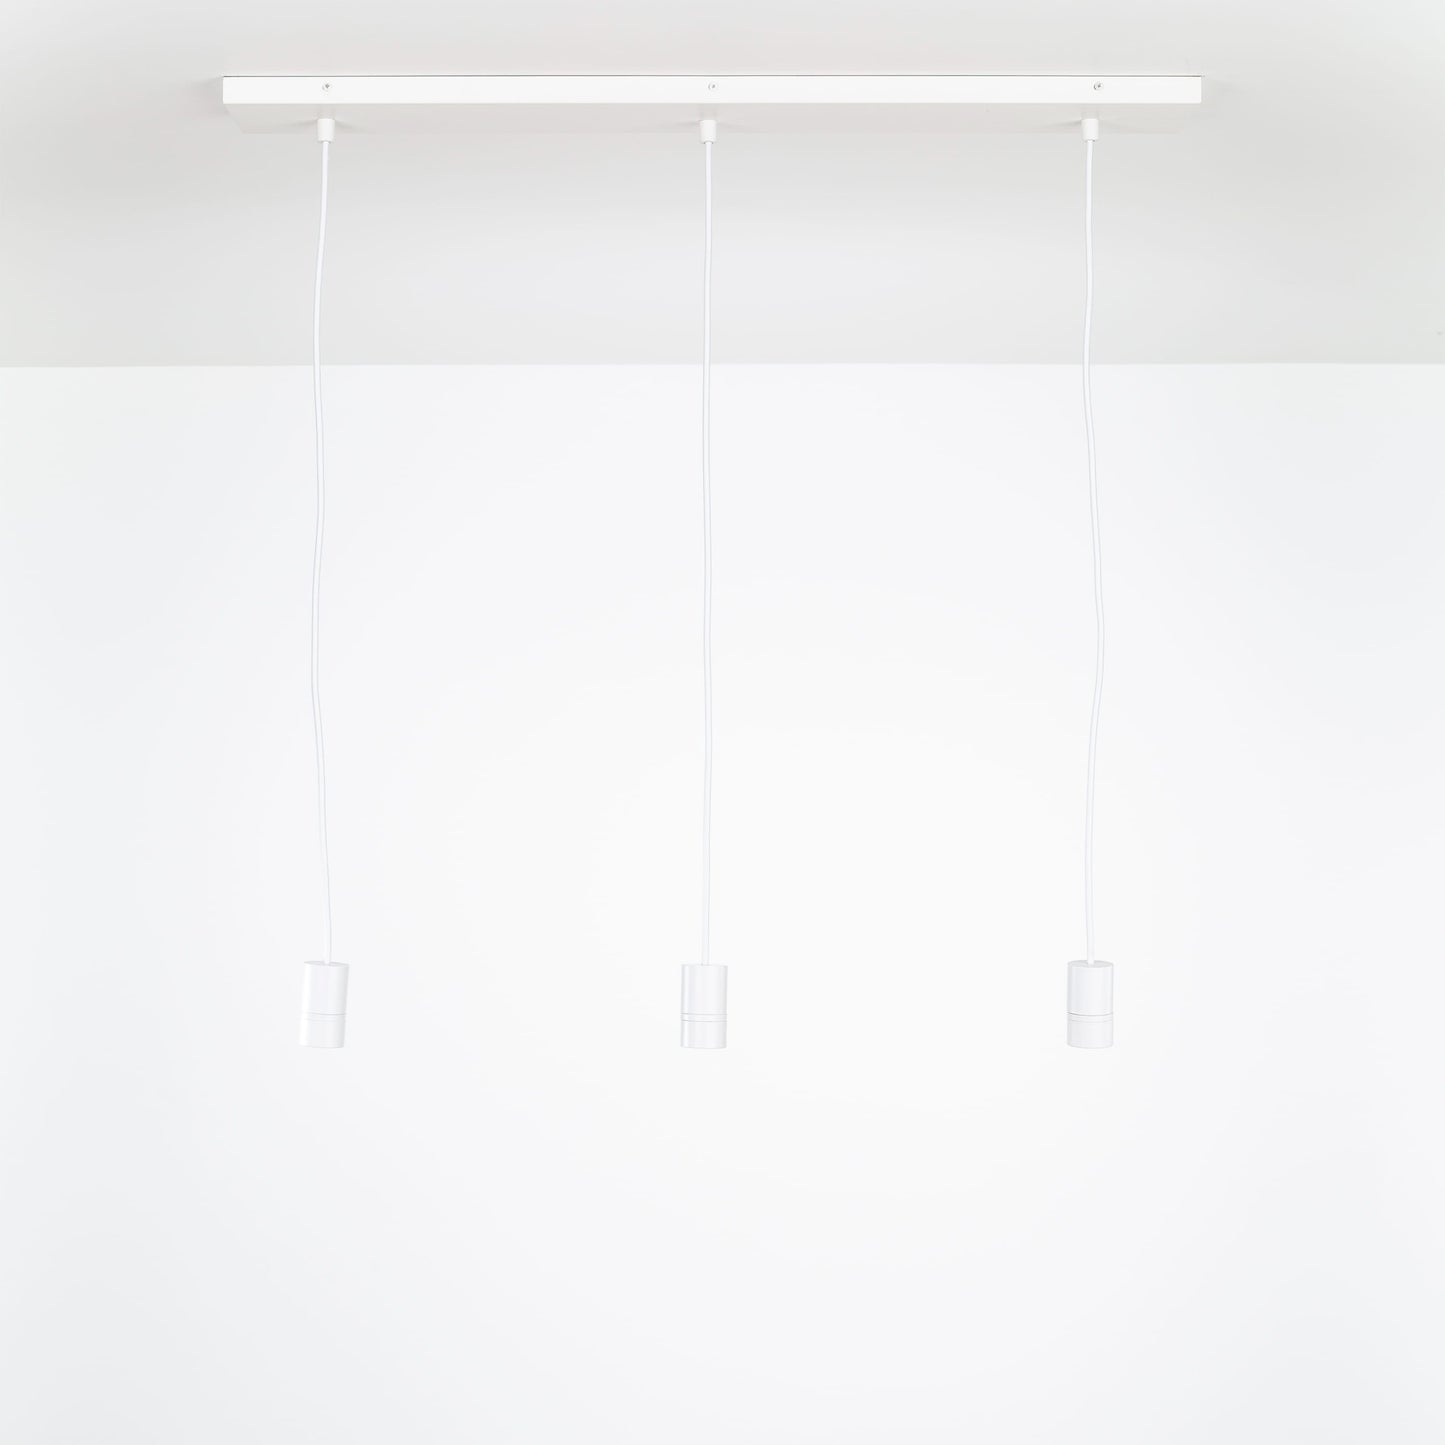 AiO (All-in-One) 3-Line Chandelier